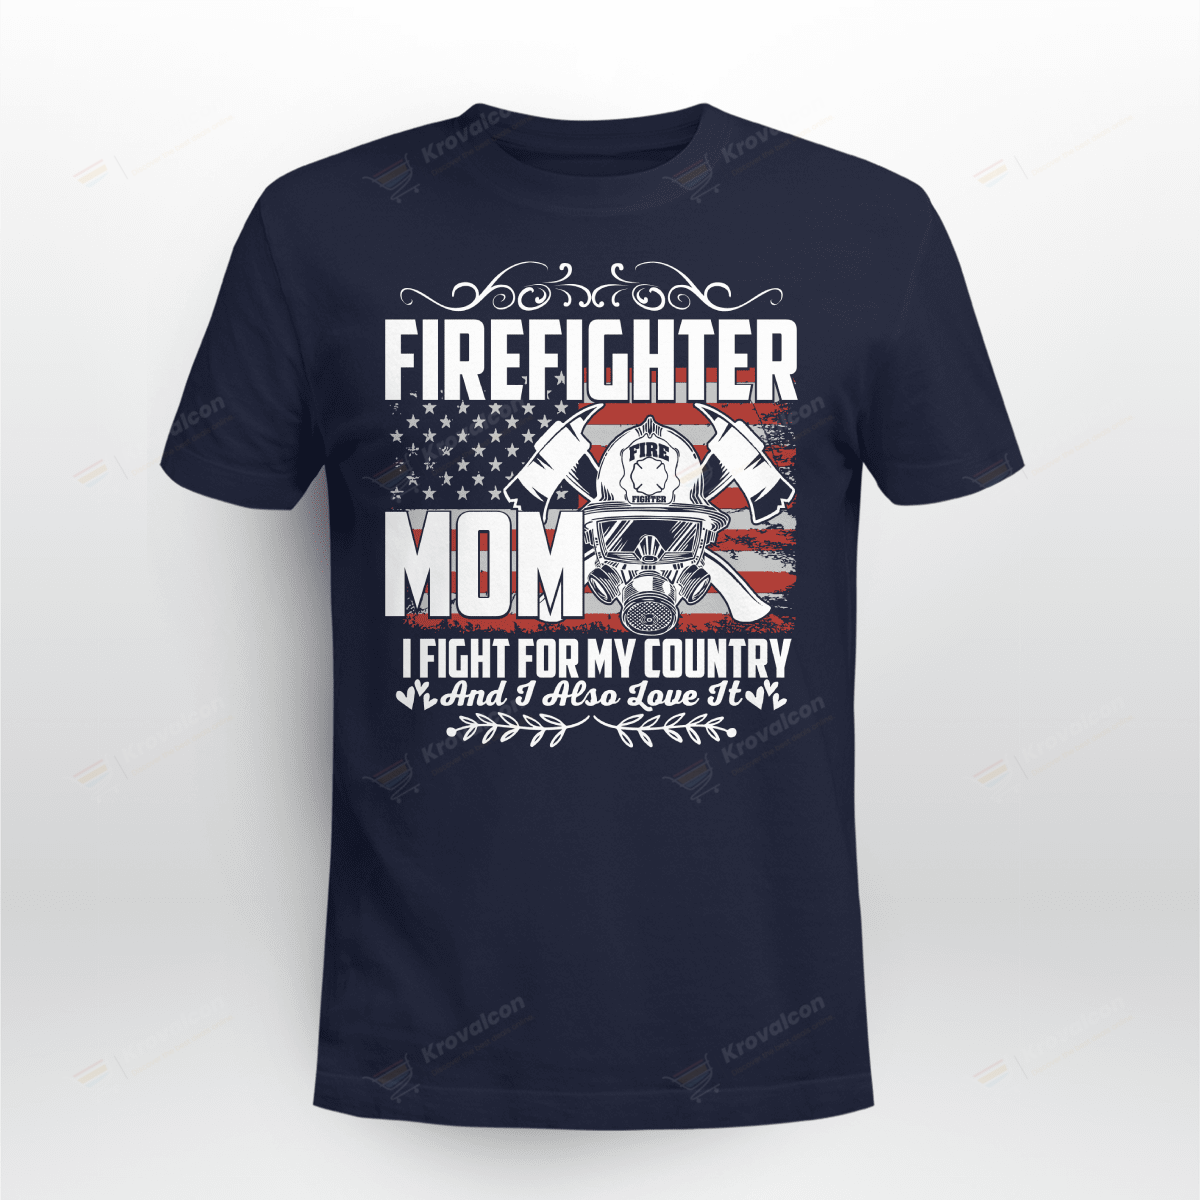 FIREFIGHTER MOM I FIGHT FOR MY COUNTRY